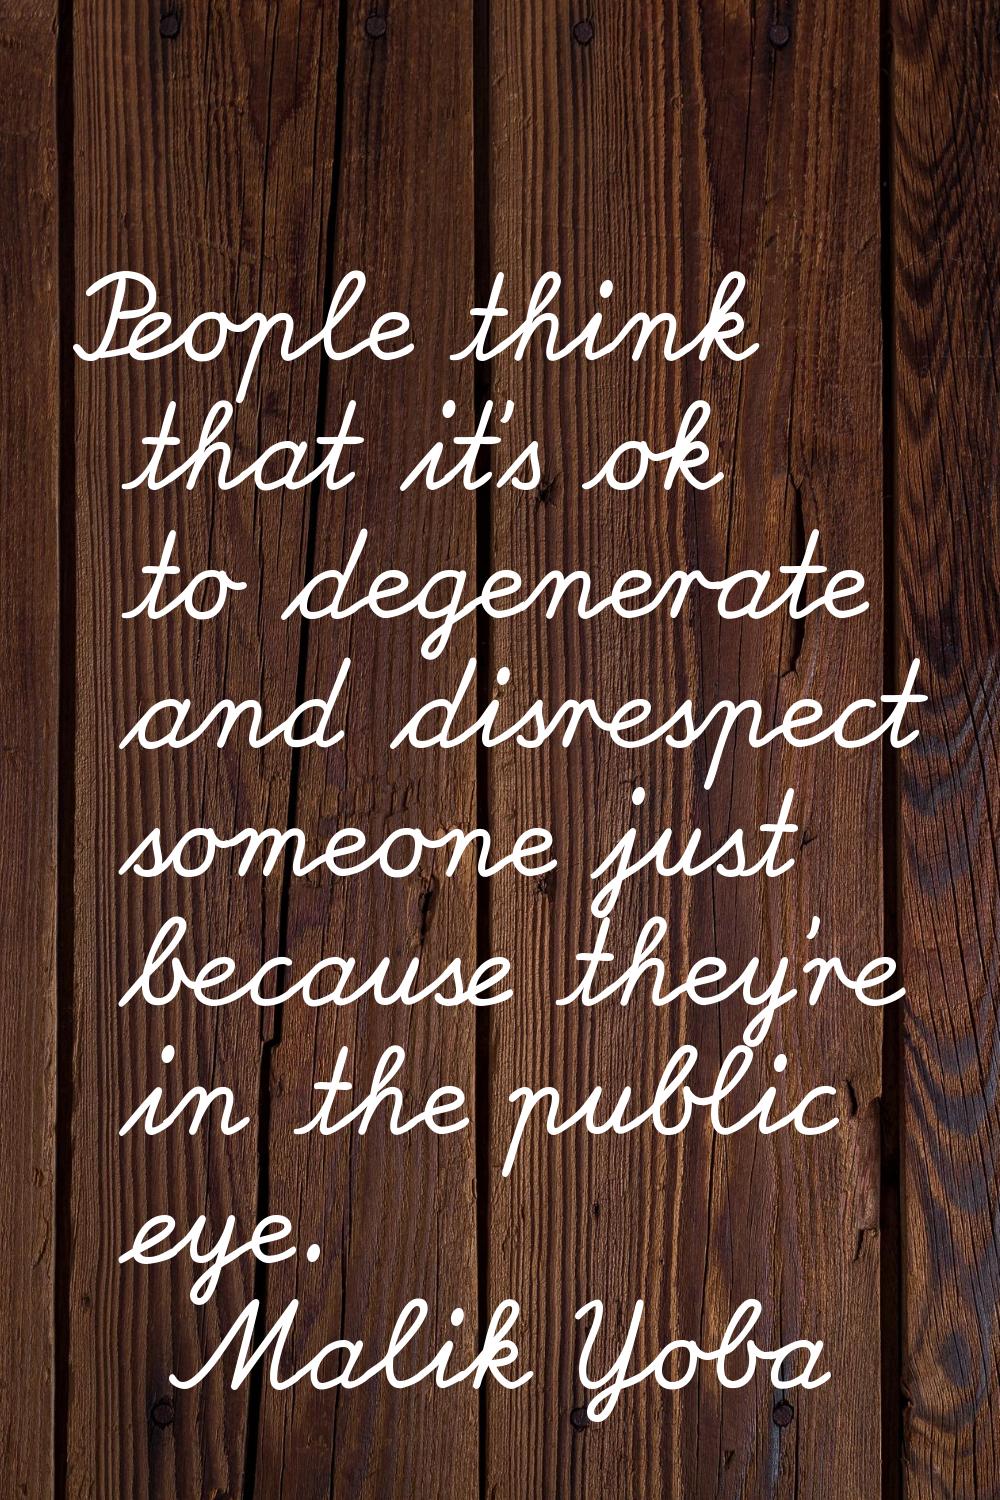 People think that it's ok to degenerate and disrespect someone just because they're in the public e